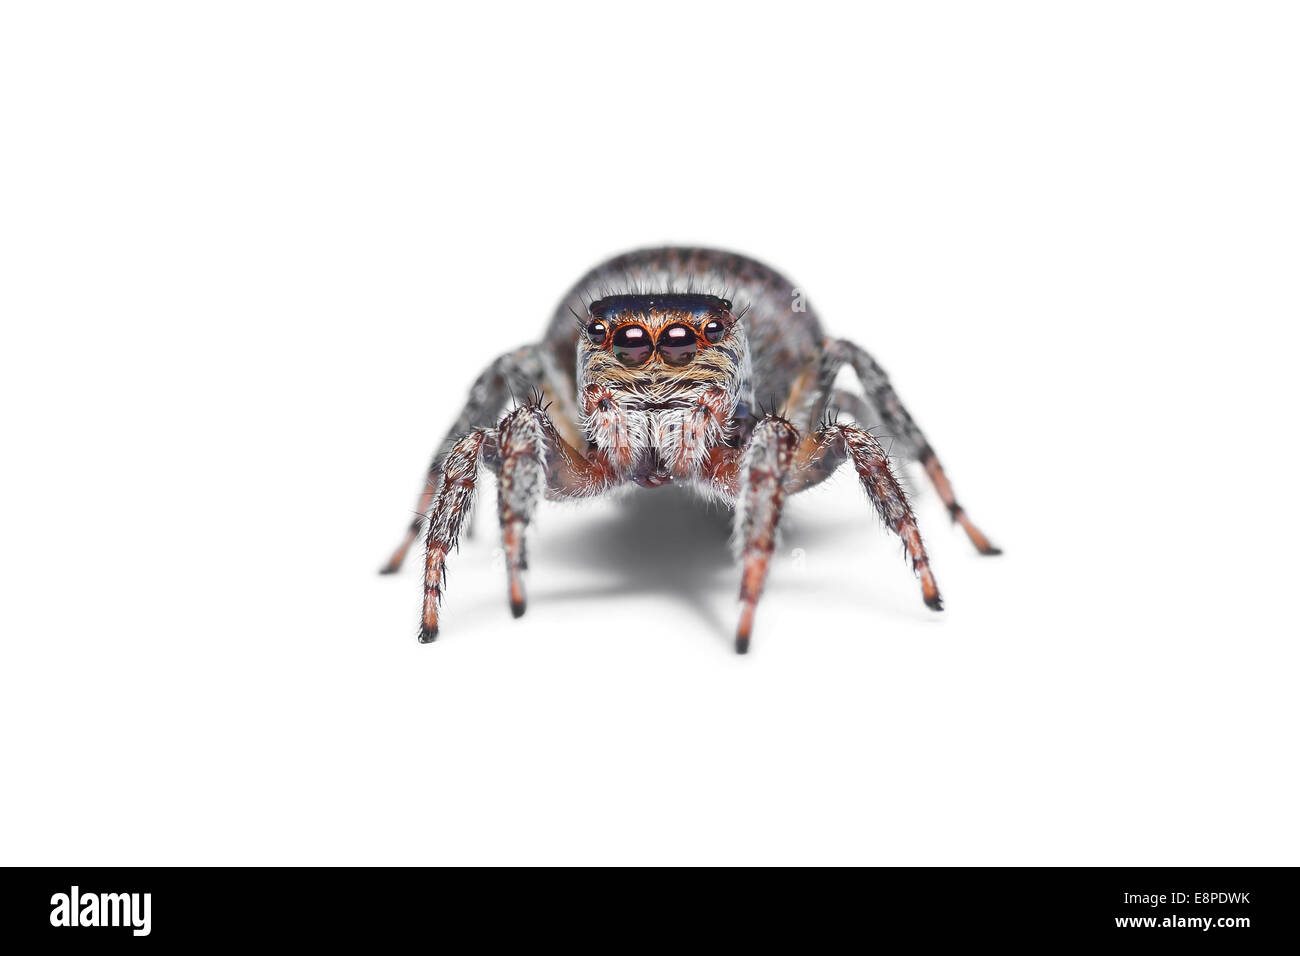 Jumping spider isolated on white Stock Photo